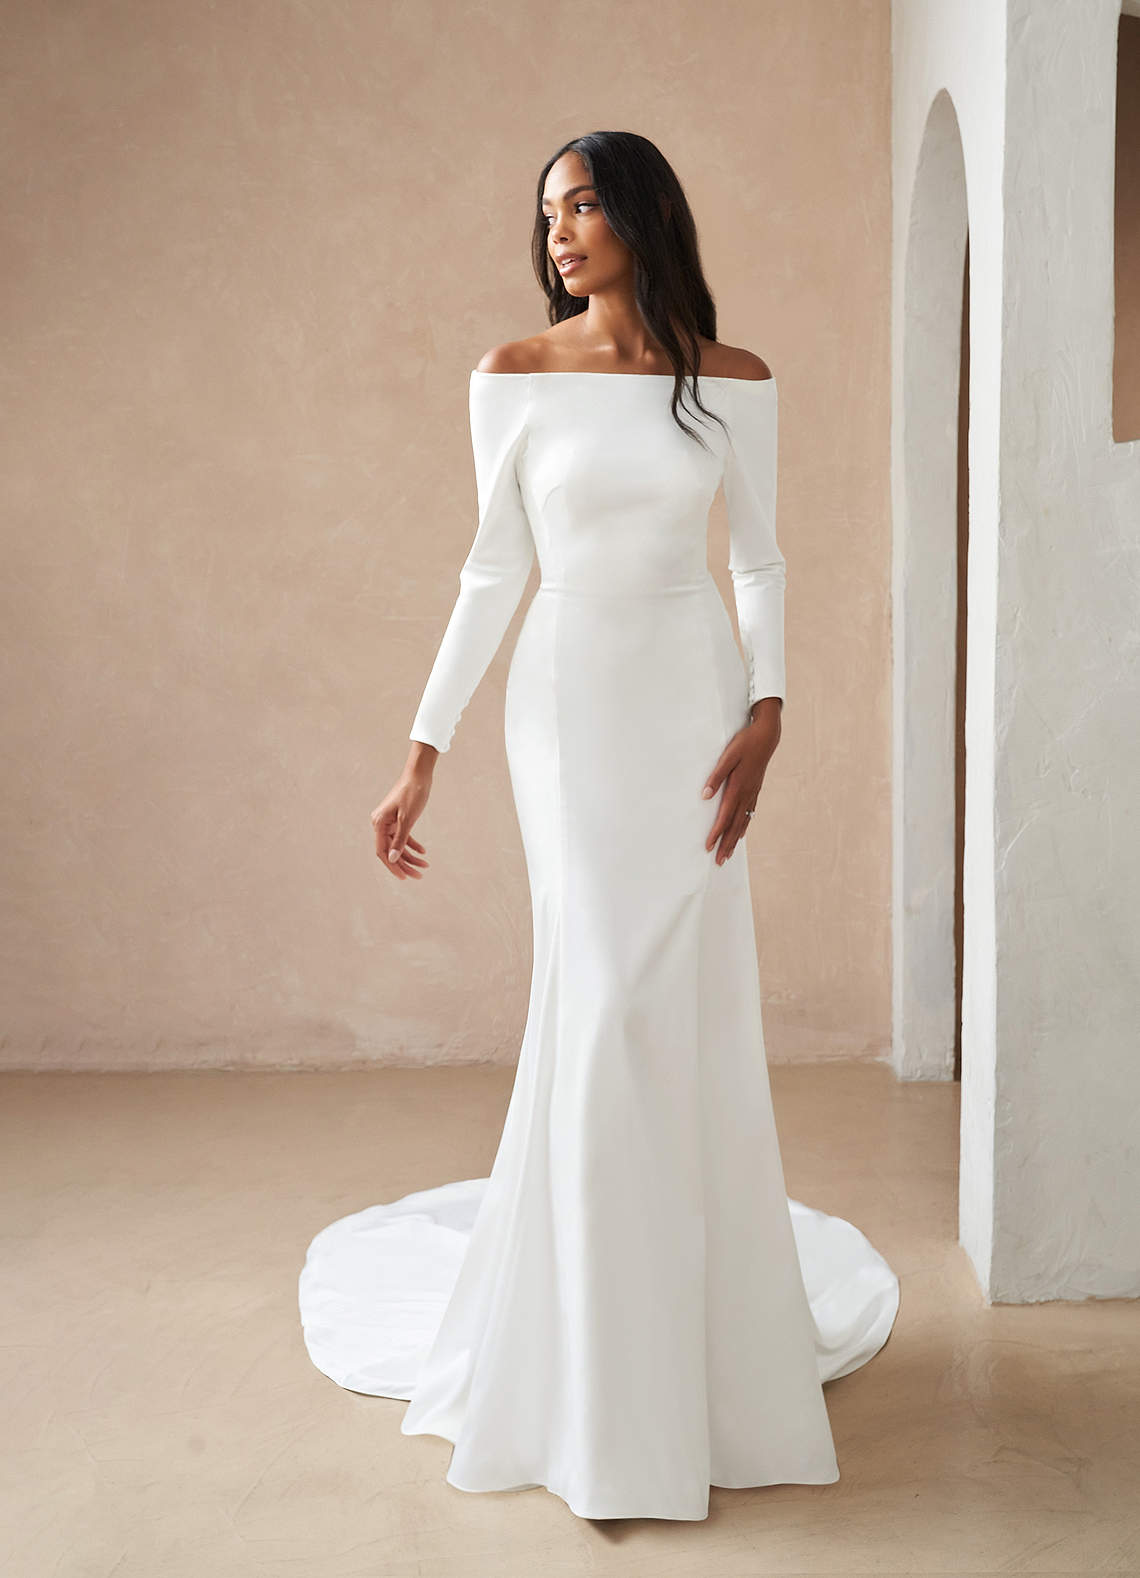 satin a line wedding dress with semi-cathedral length train